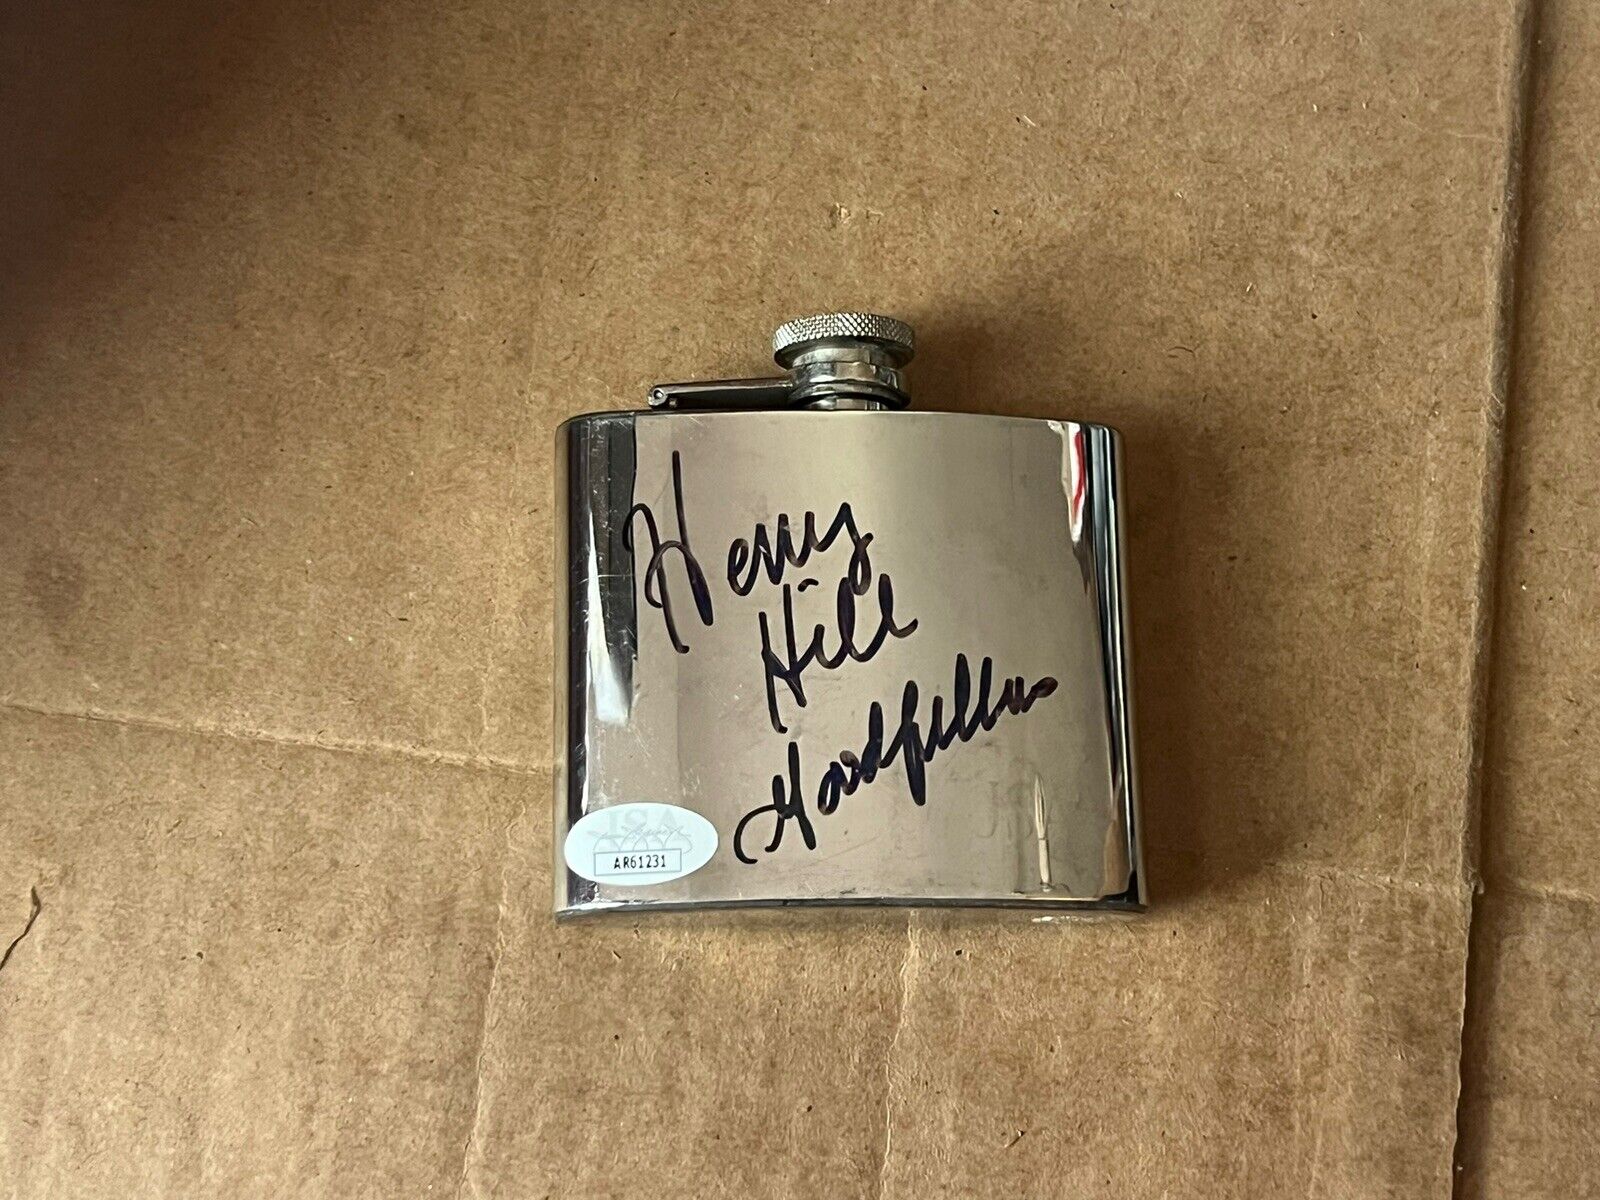 HENRY HILL GOODFELLA MOBSTER AUTOGRAPHED STAINLESS STEEL WHISKEY FLASK w/JSA